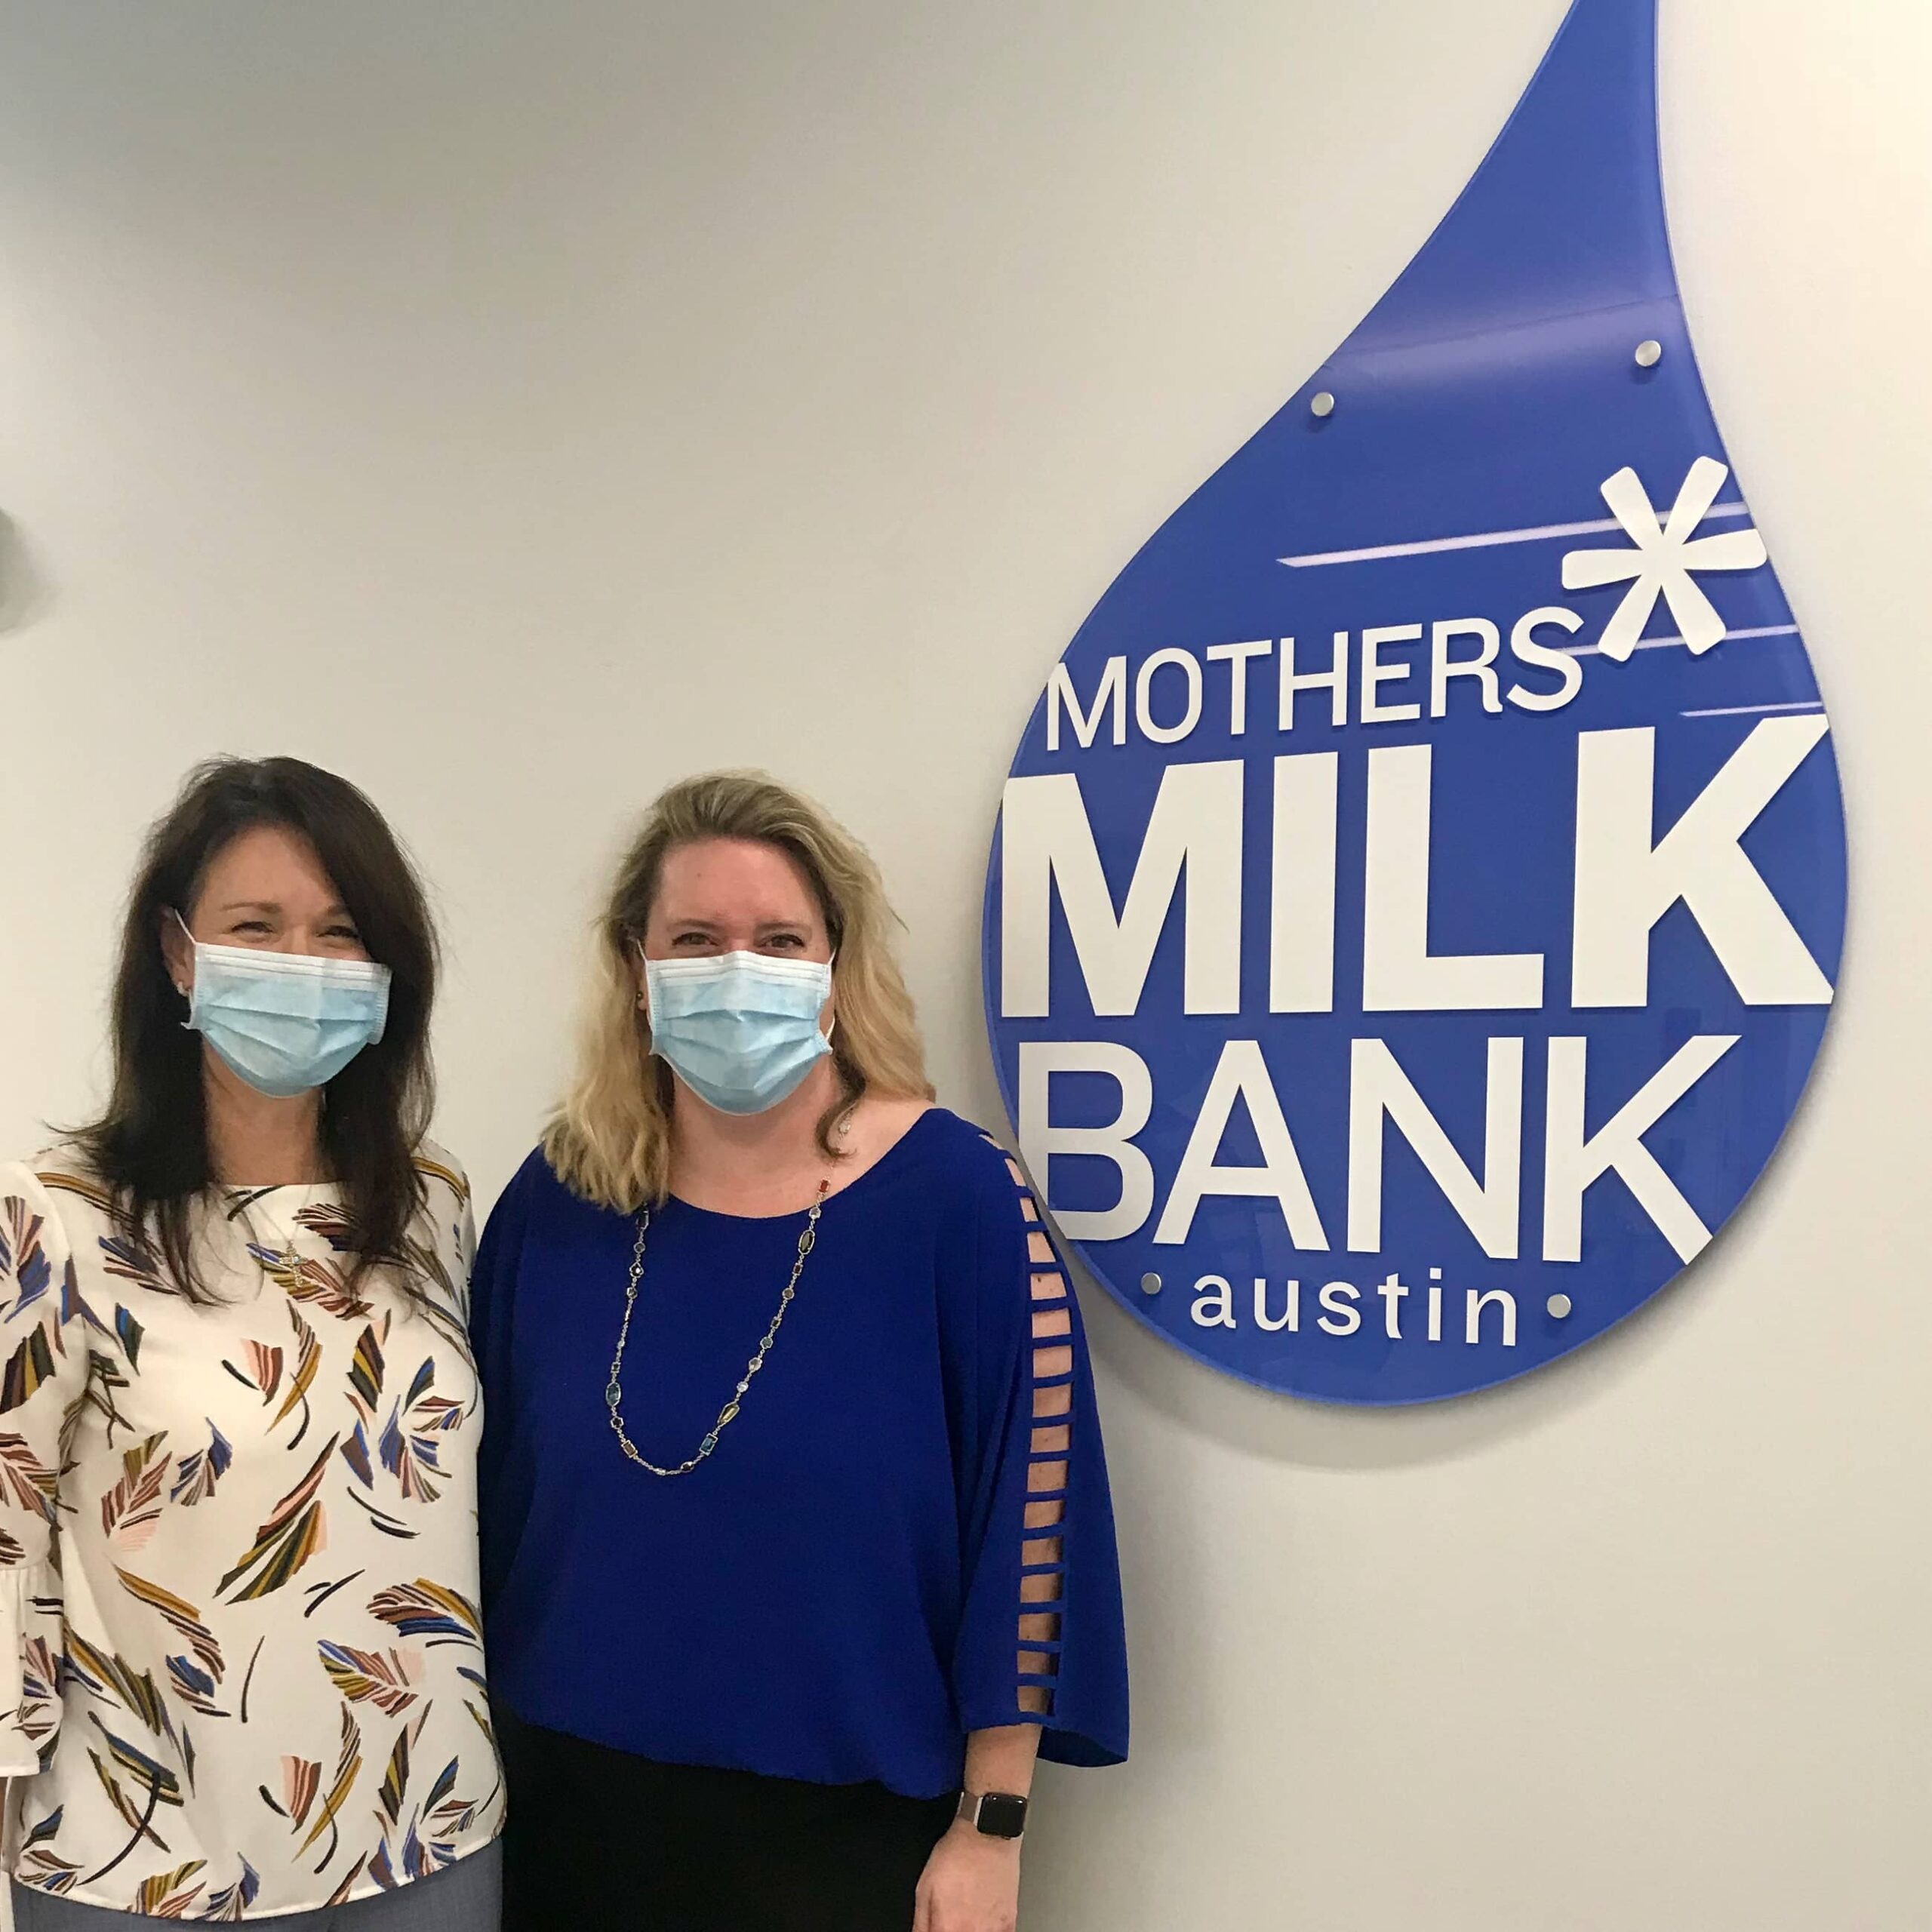 Mothers supporting mothers milk bank austin